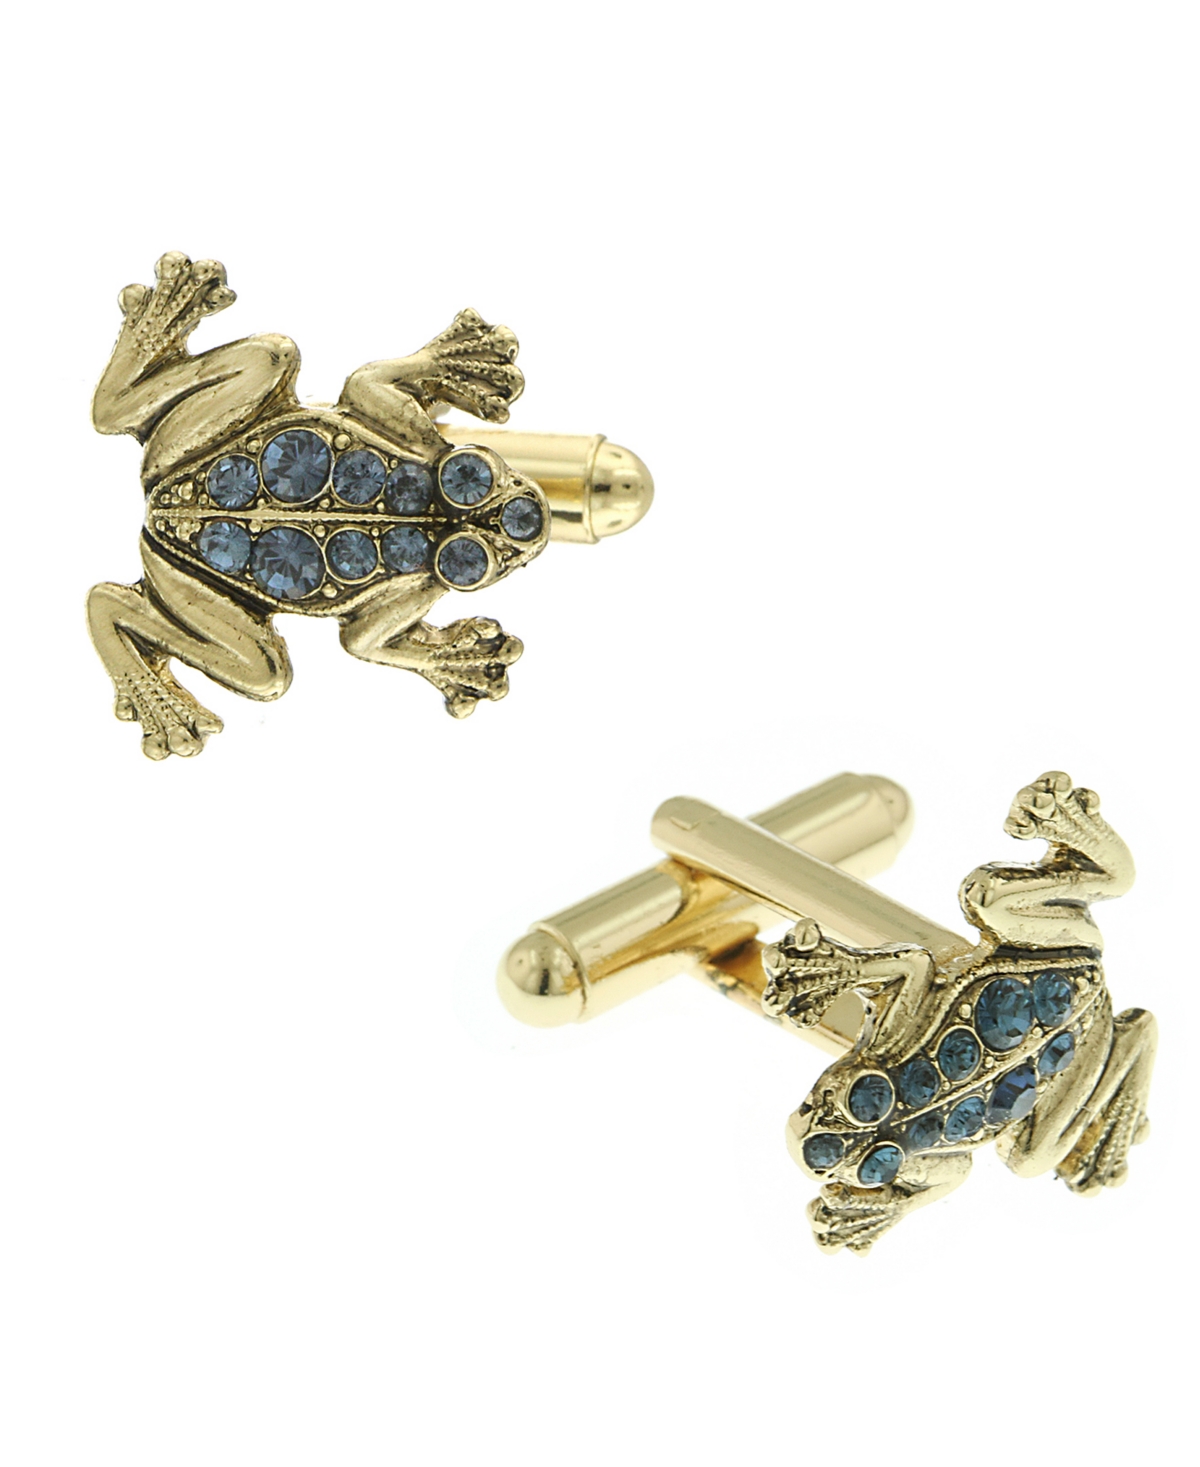 1928 Jewelry 14k Gold Plated Crystal Frog Cufflinks In Blue